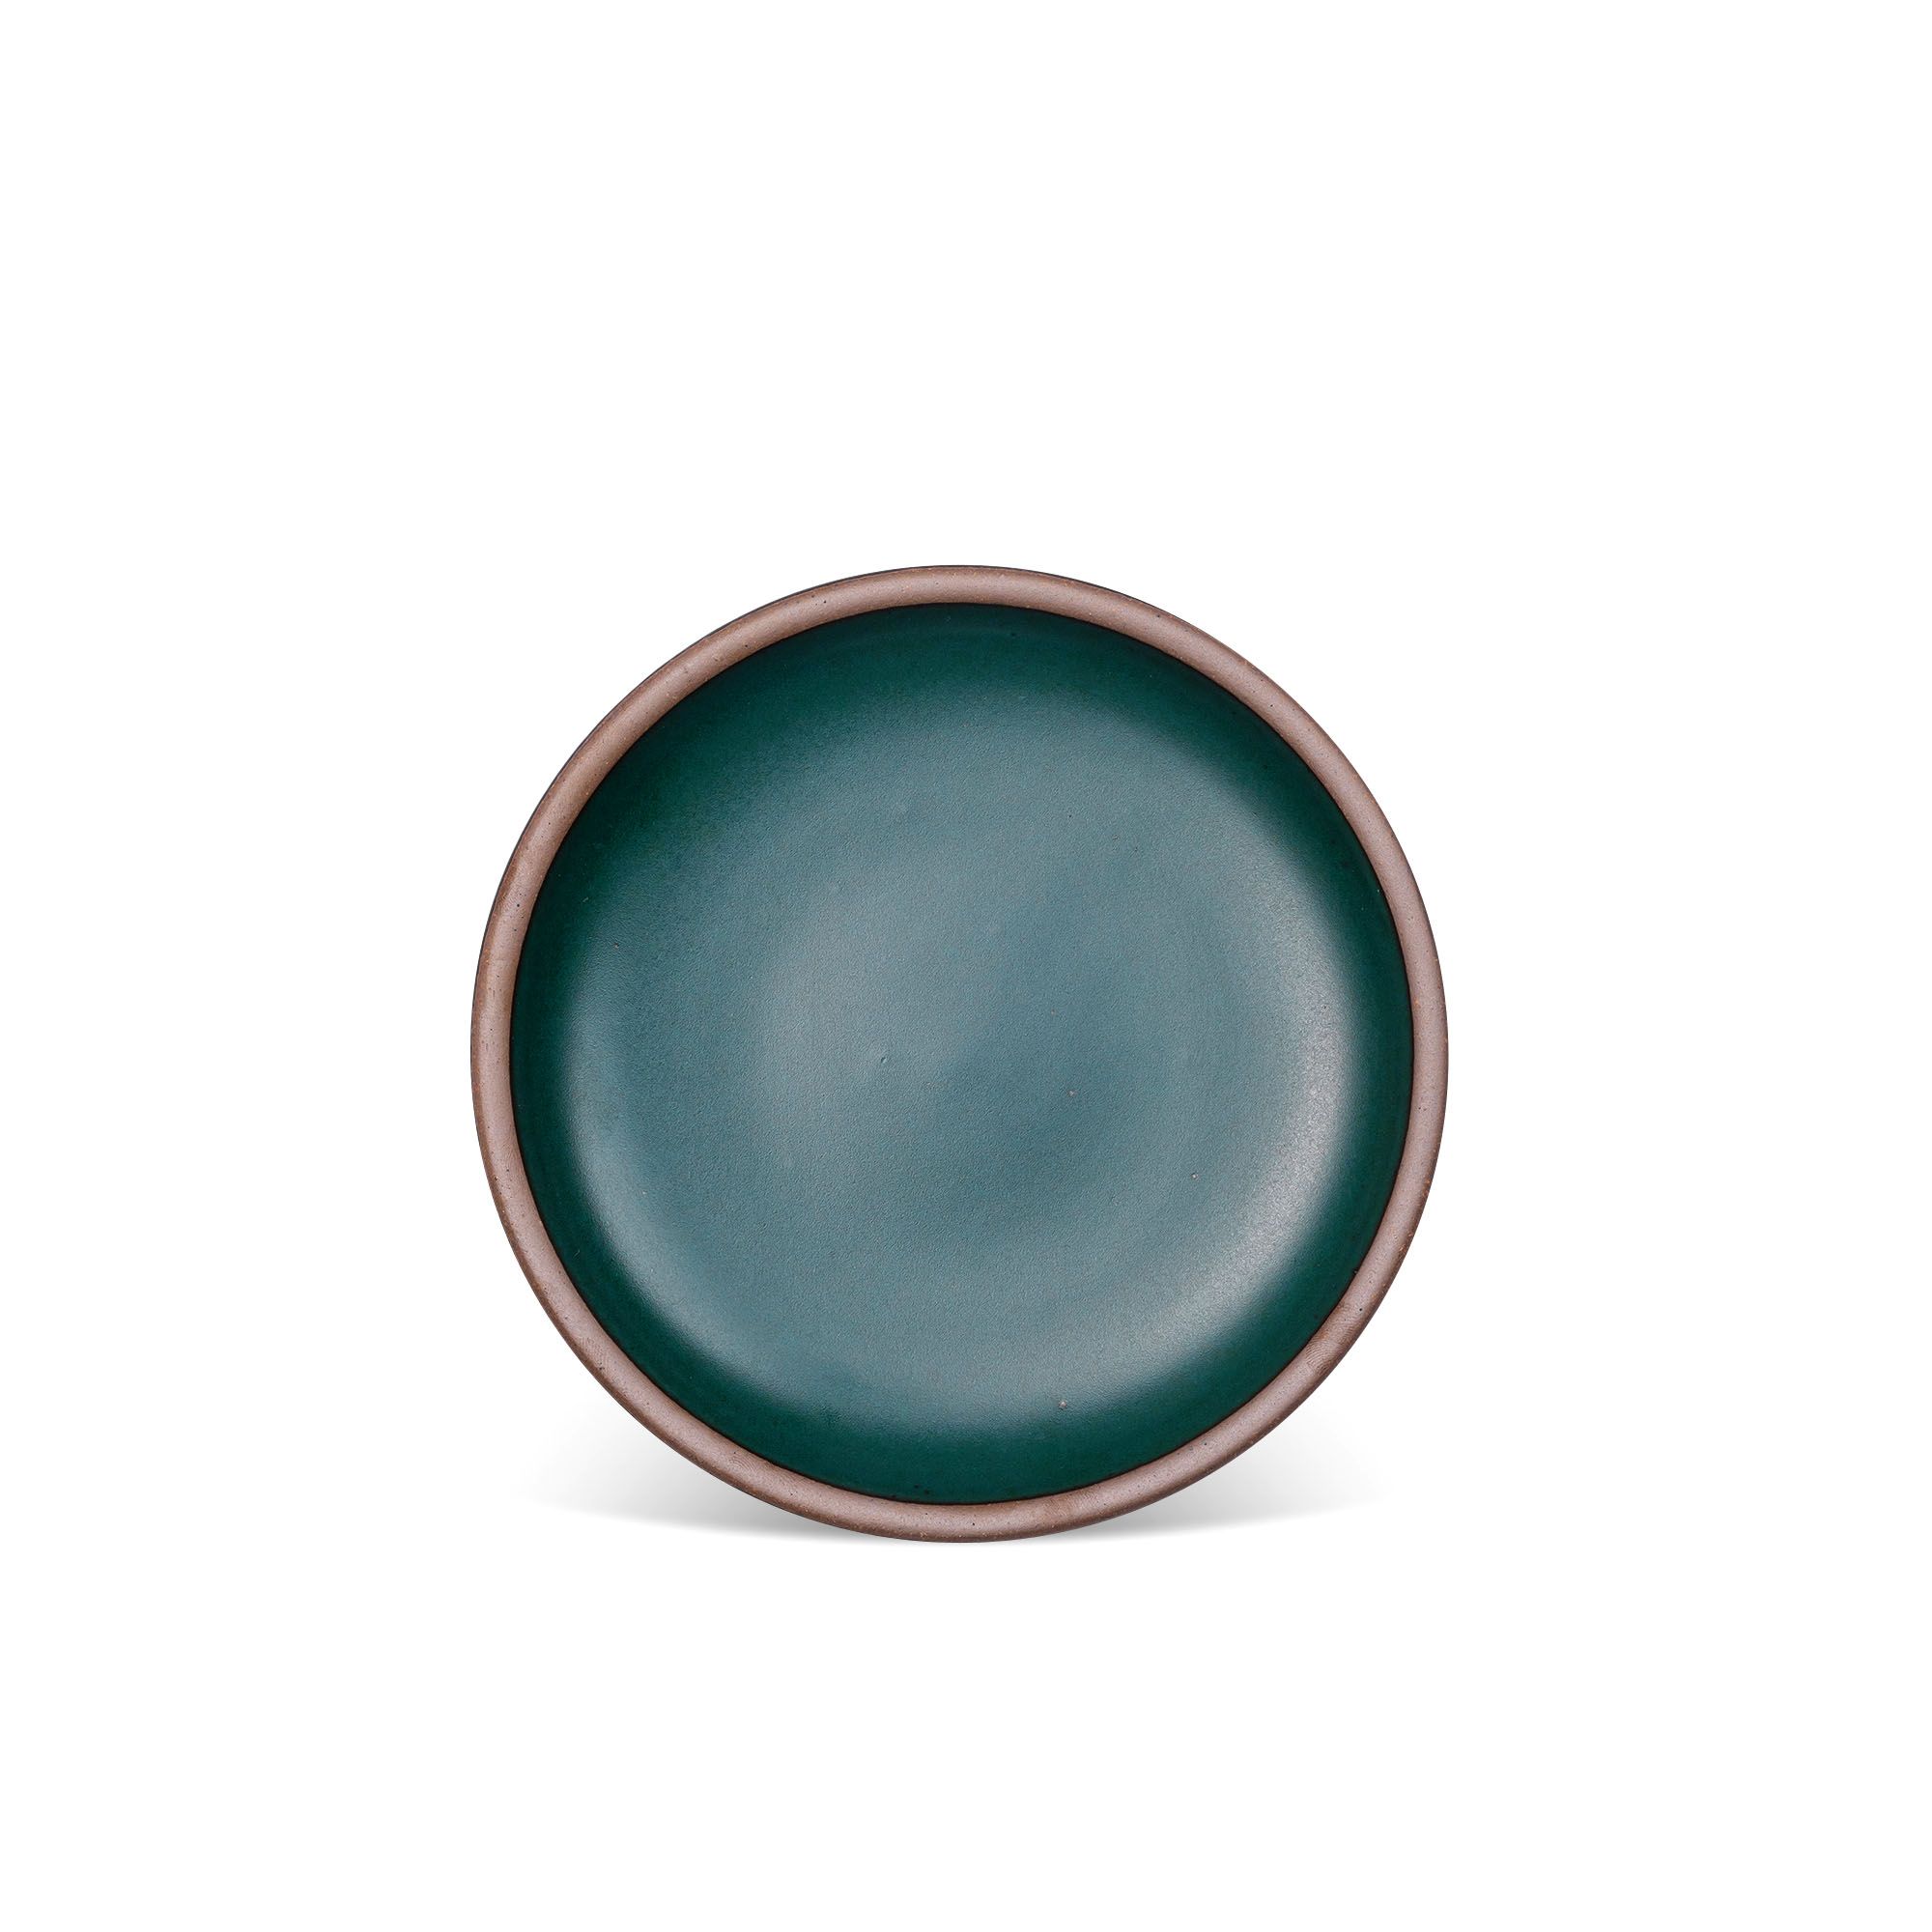 A medium sized ceramic plate in a deep dark teal color featuring iron speckles and an unglazed rim.